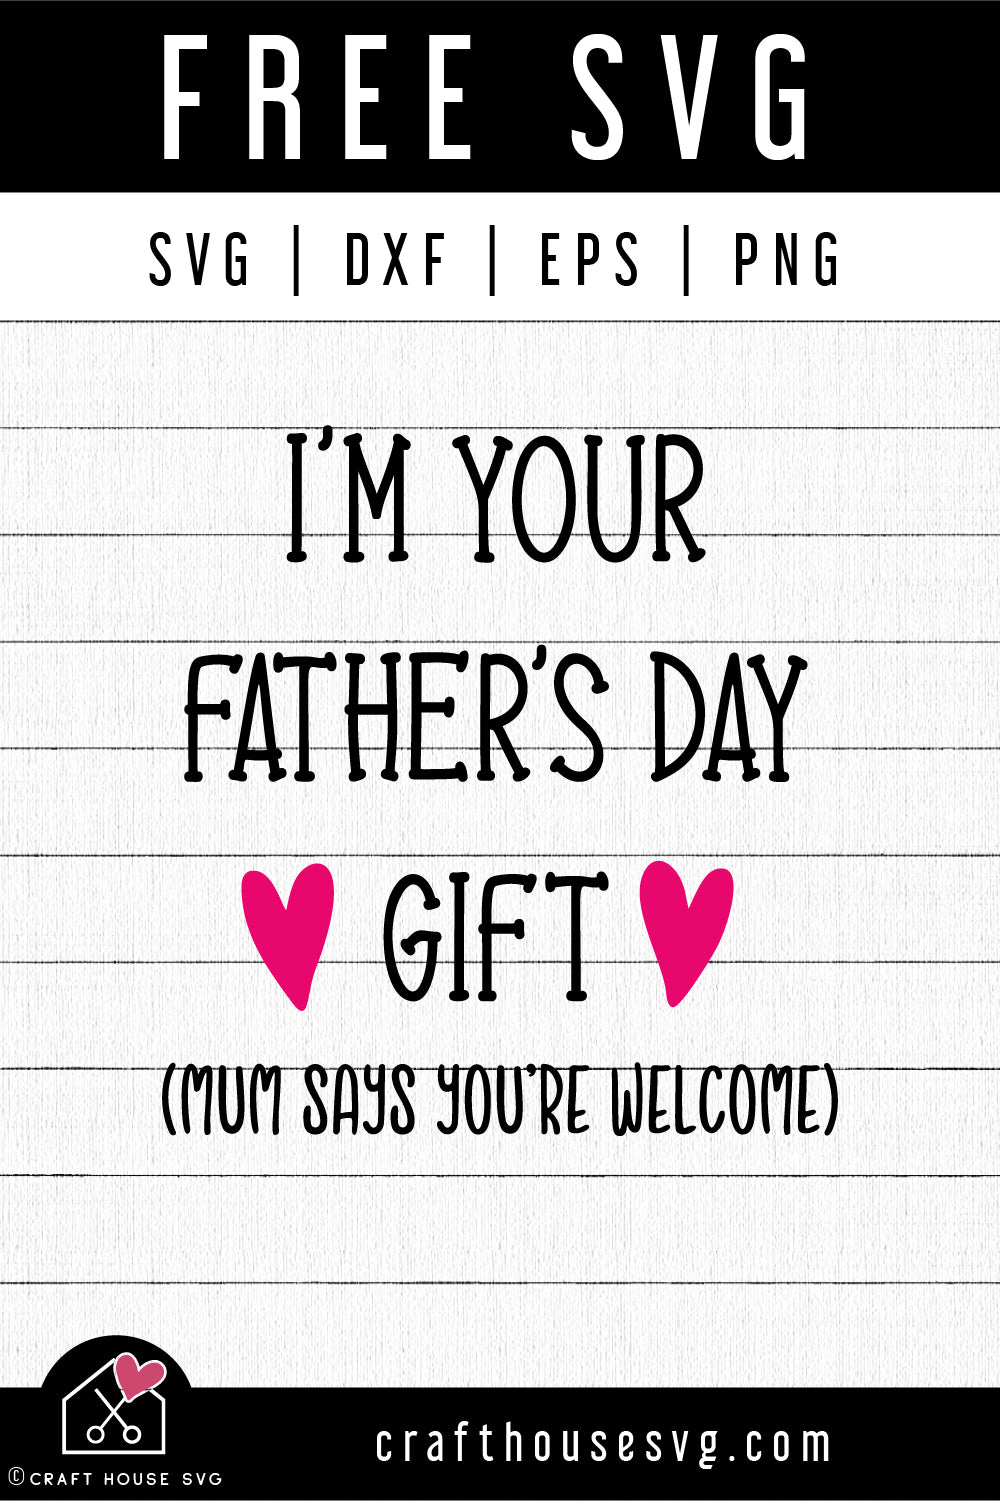 FREE I'm your father's day gift mum says you're welcome SVG Baby onesie SVG | FB223